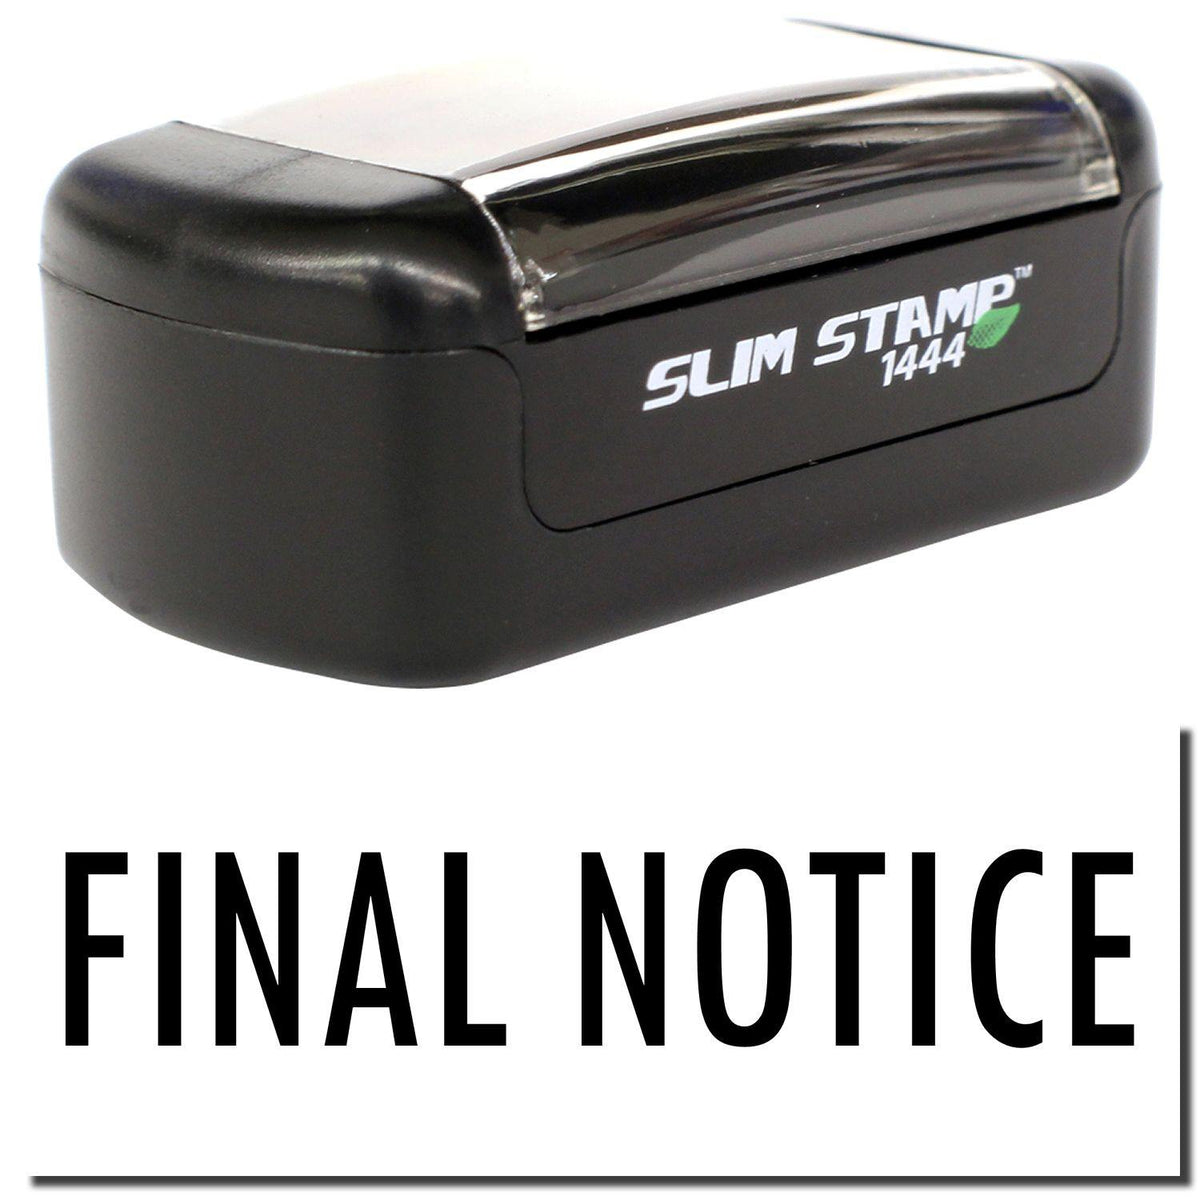 A stock office pre-inked stamp with a stamped image showing how the text &quot;FINAL NOTICE&quot; is displayed after stamping.